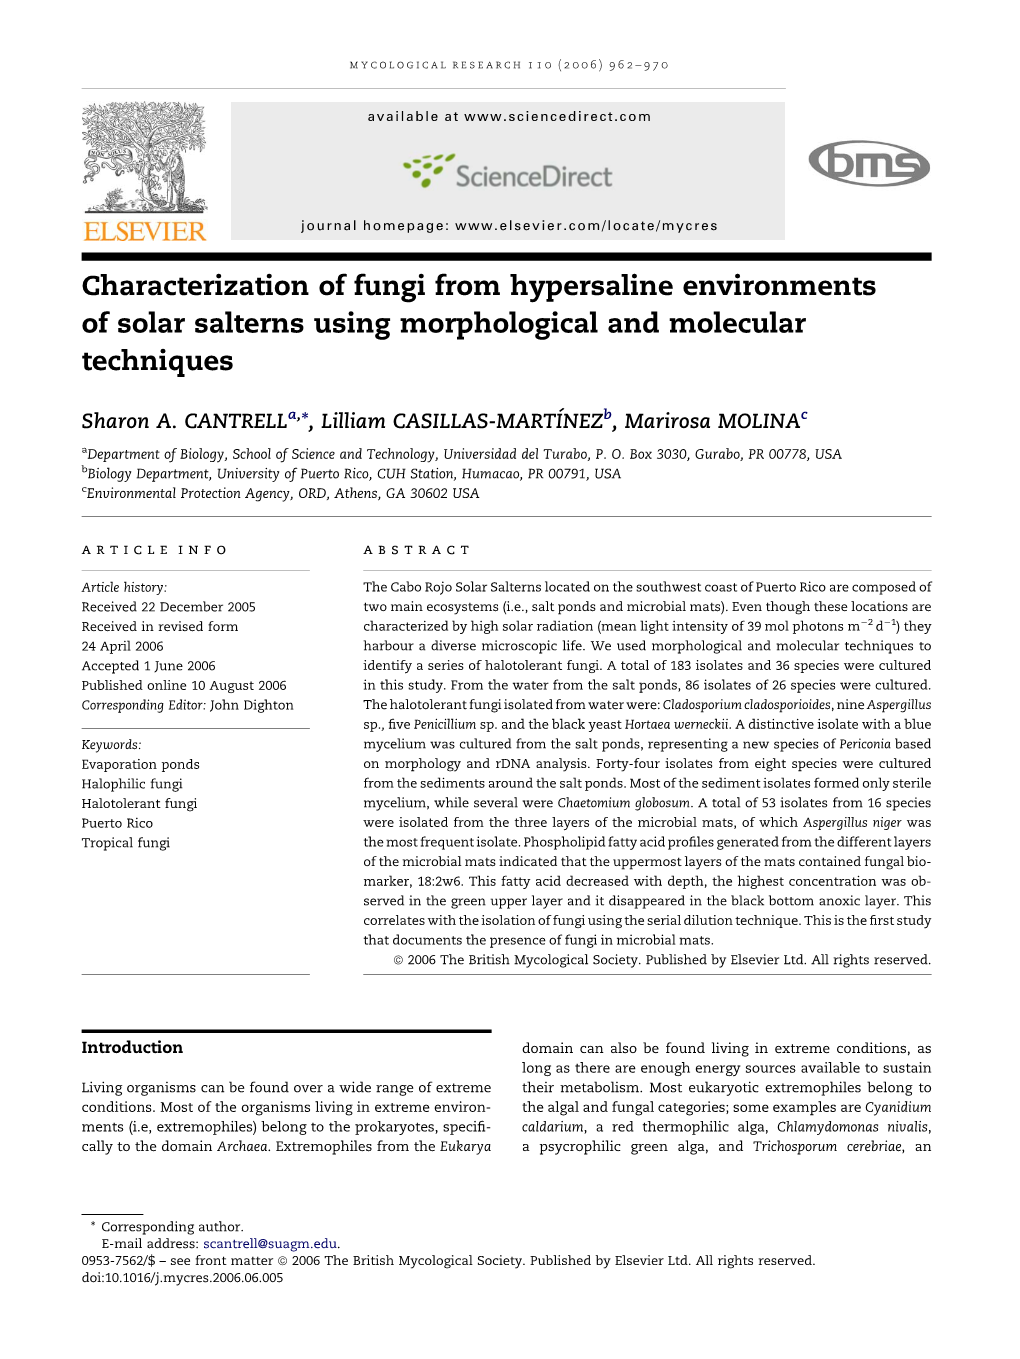 Characterization of Fungi from Hypersaline Environments of Solar Salterns Using Morphological and Molecular Techniques